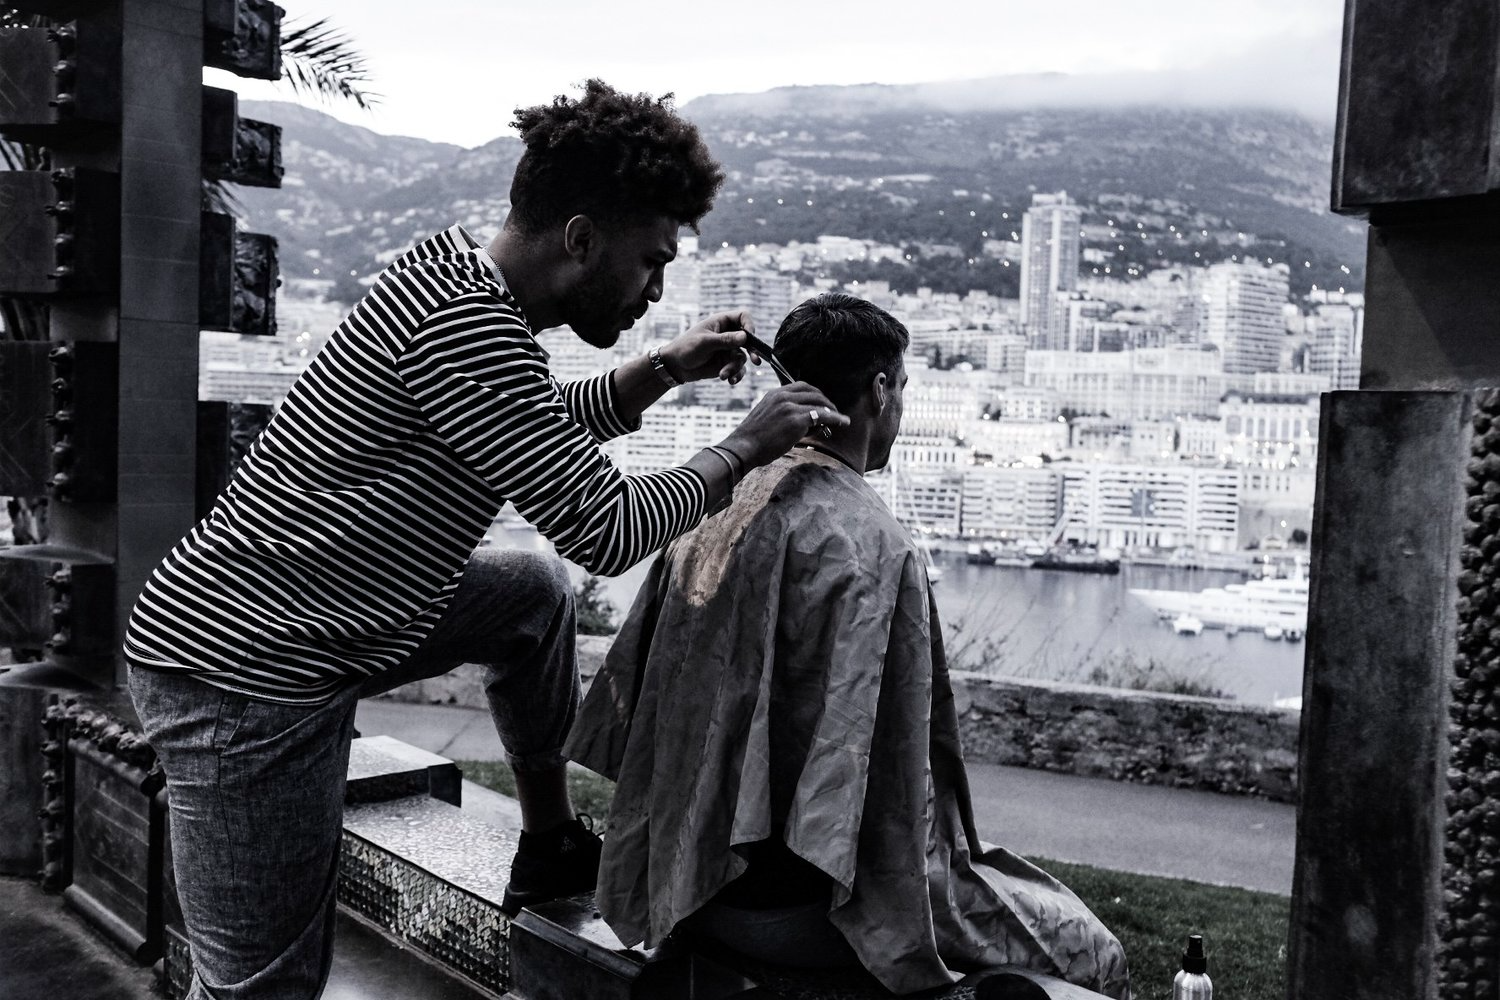 Julien Howard a.k.a. Velo Barber wearing a striped shirt and using shears to cut a persons hair in front of a terrace opening with a beautiful view of a city scape on a mountain in the background